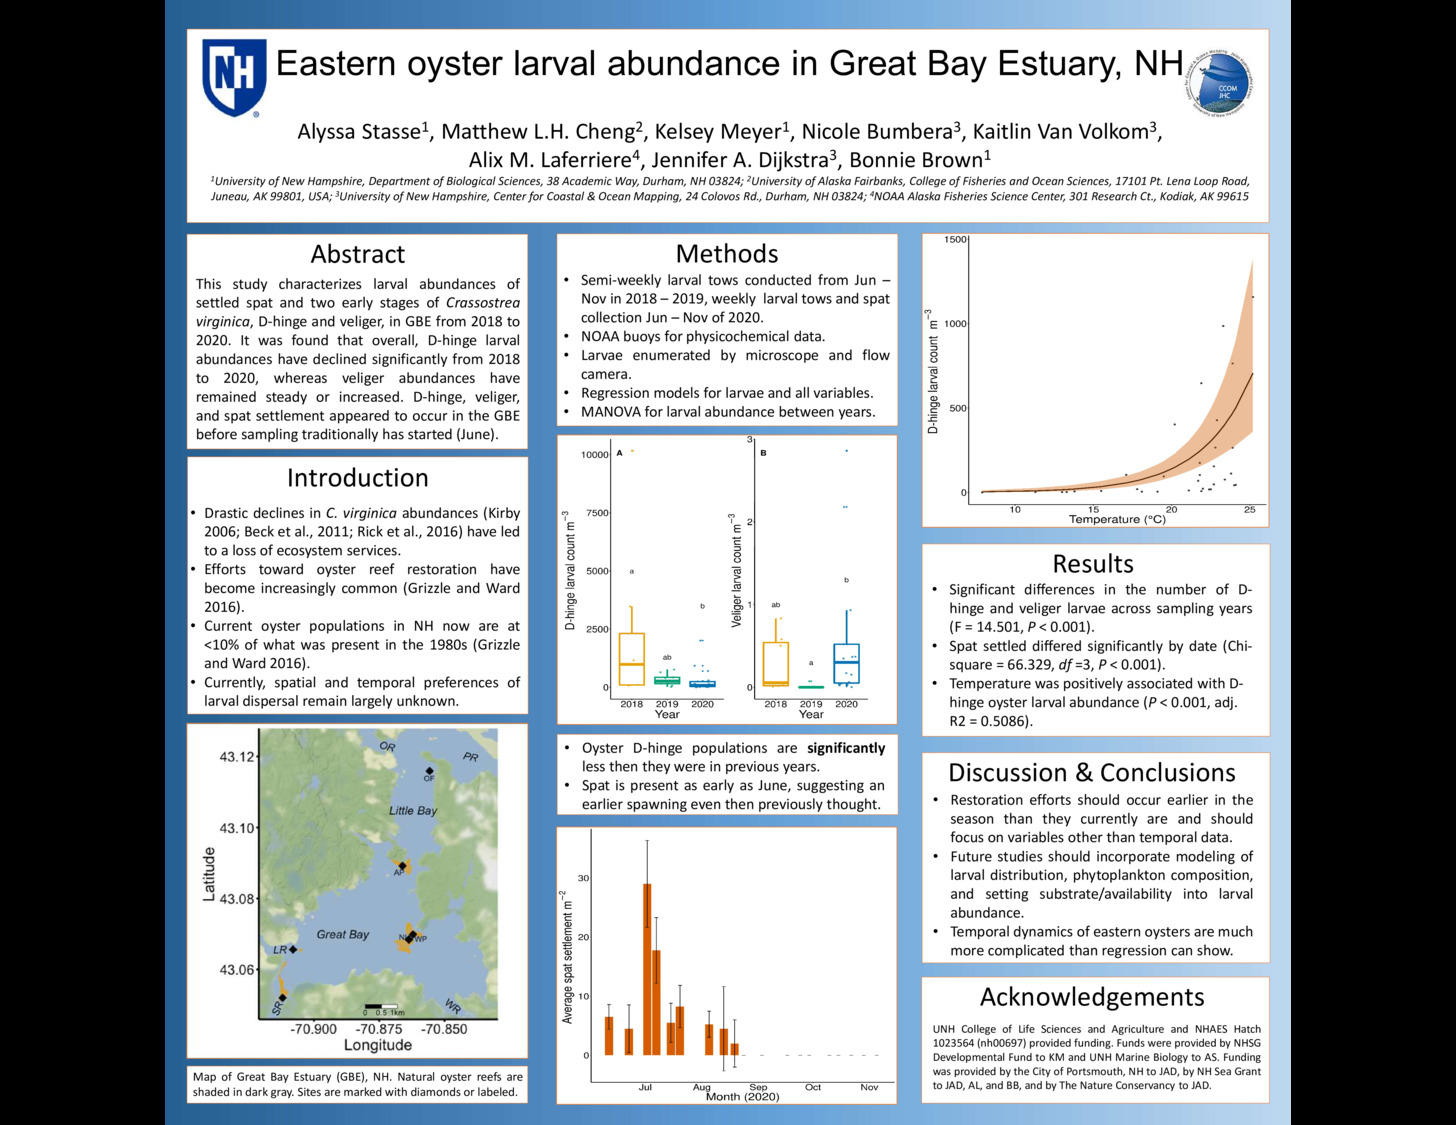 Eastern Oyster Larval Abundance In Great Bay Estuary, Nh by as1736